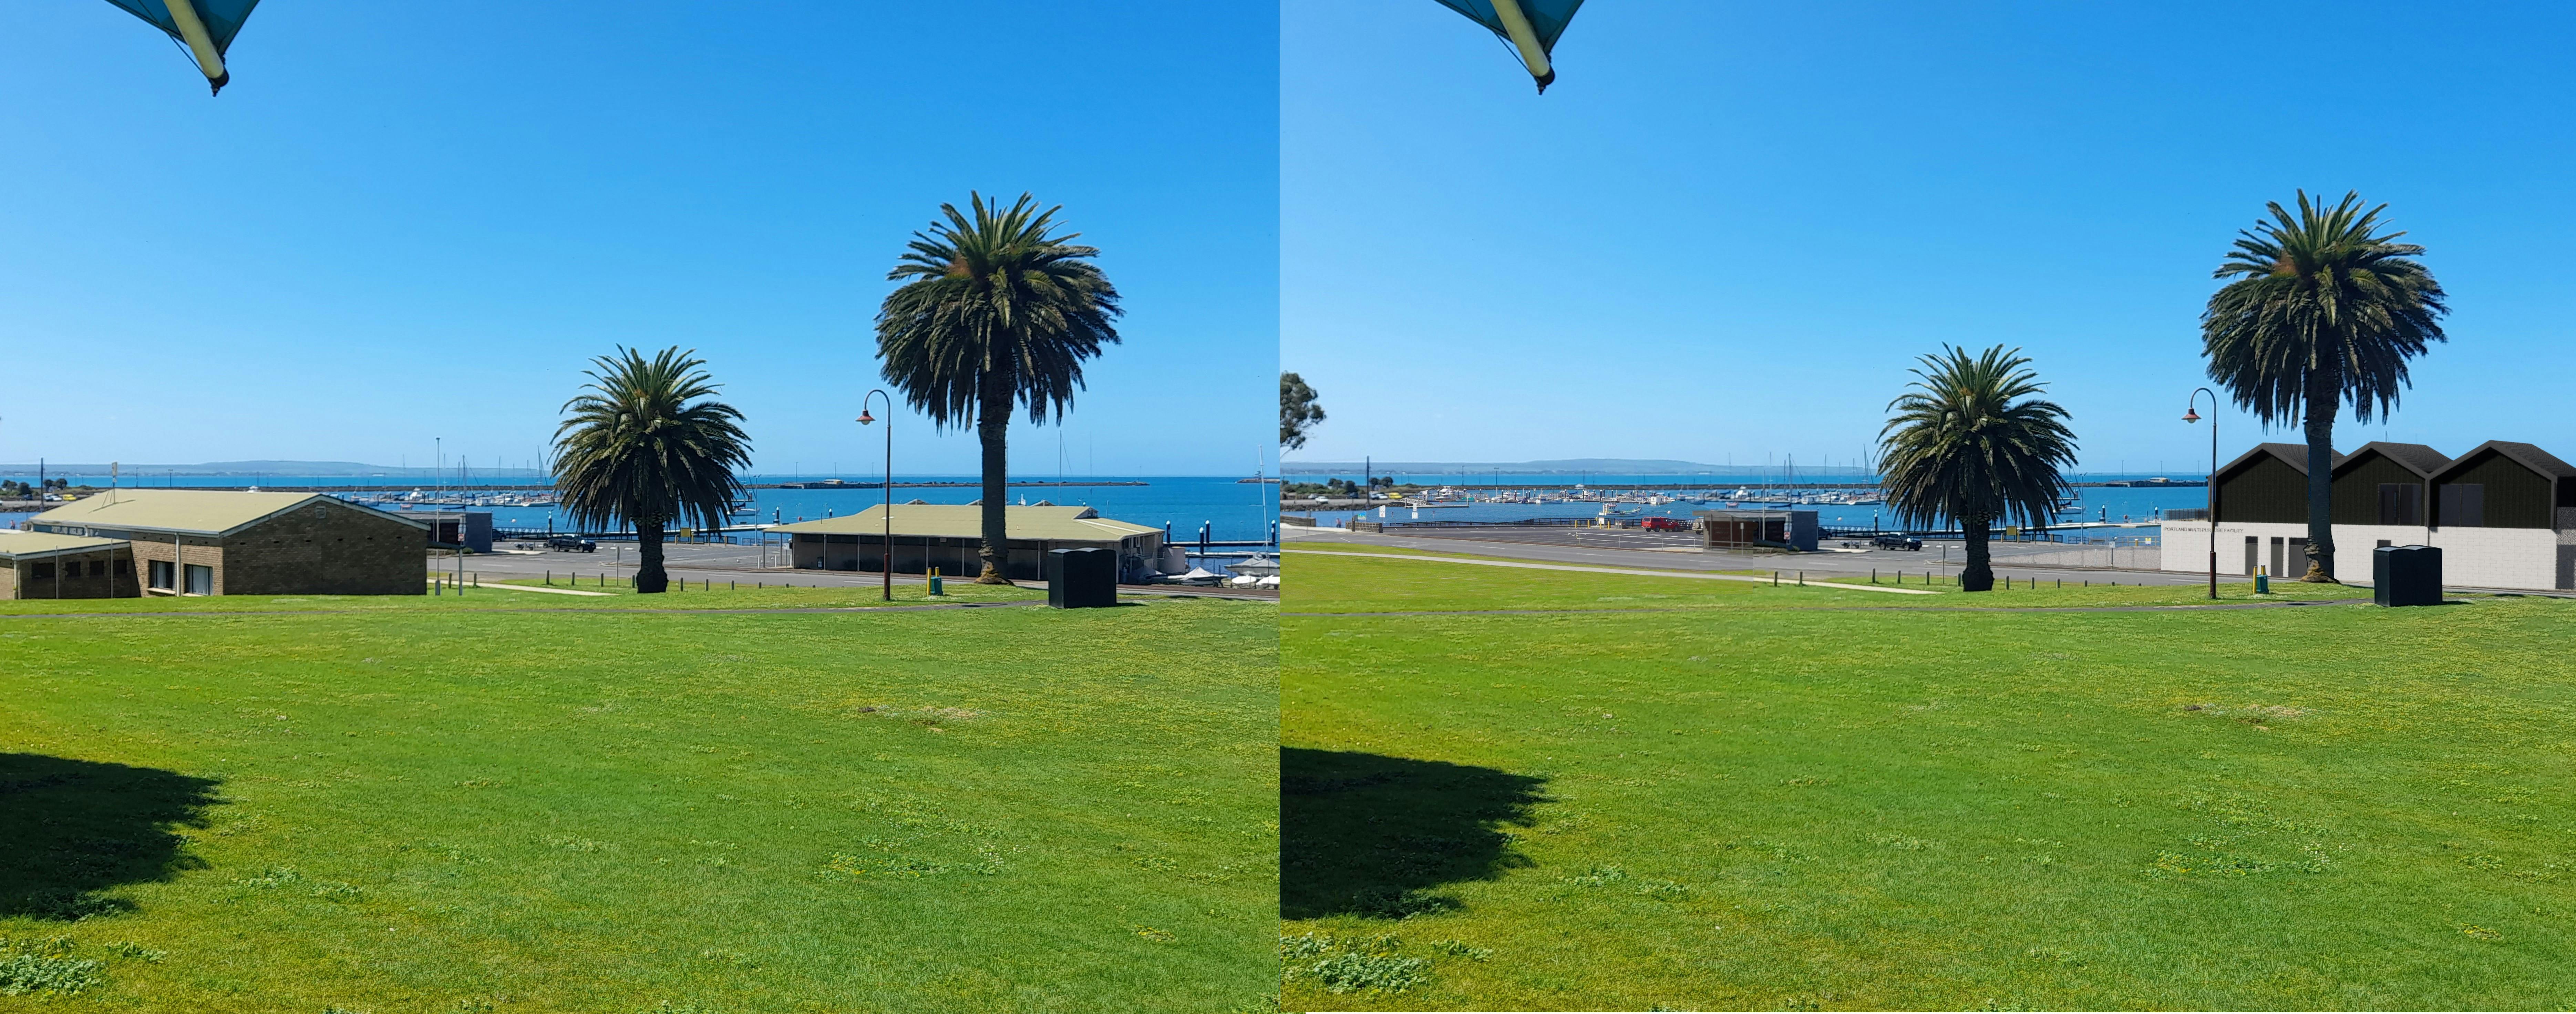 PFCP - view from Blue Umbrella on lawn off Bentinck St.jpg